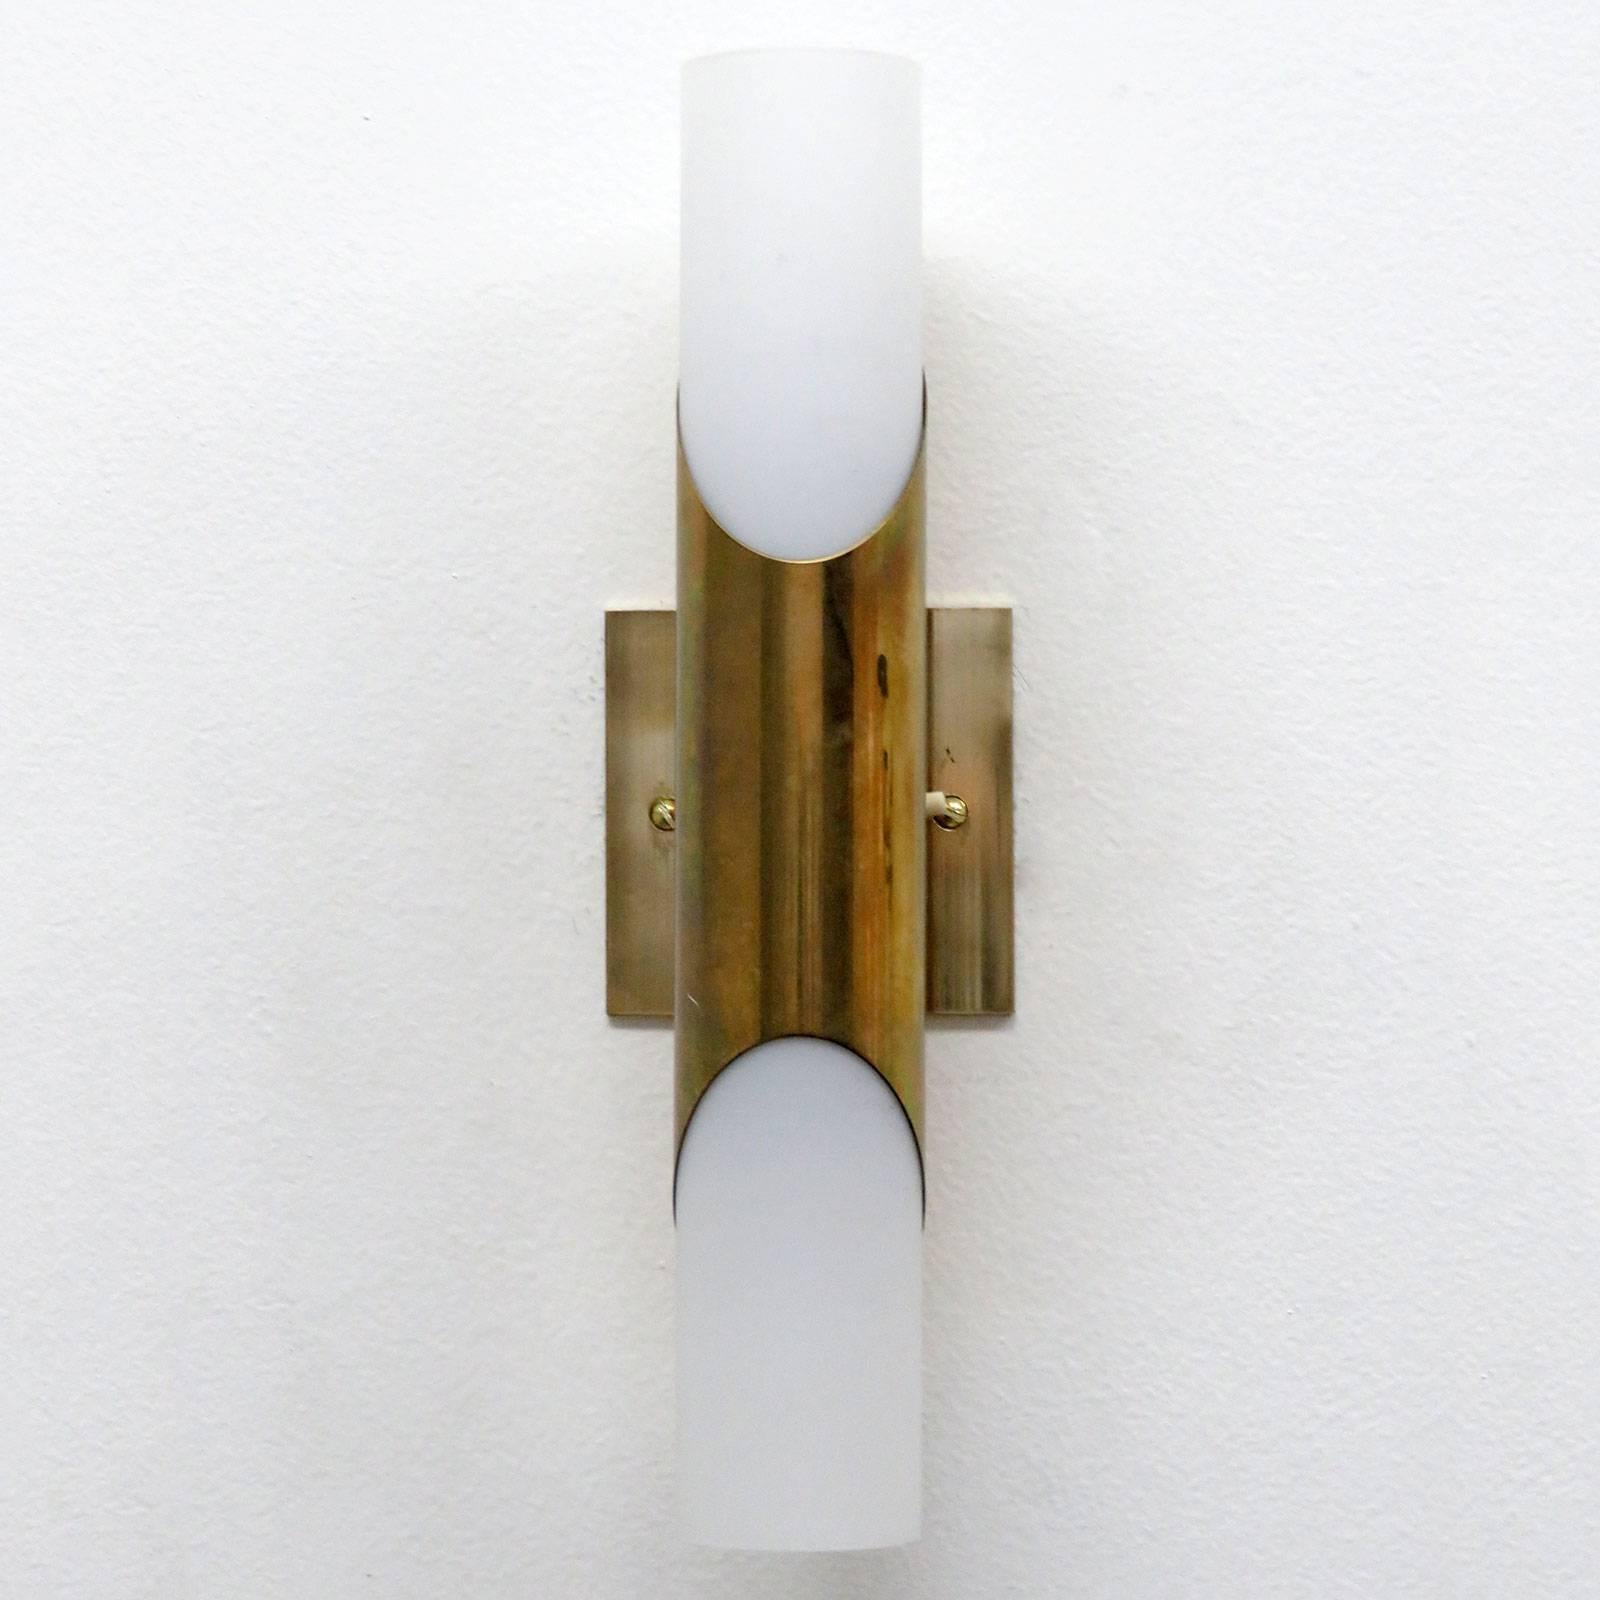 Simply elegant pair of 1970s brass wall lights by Neuhaus Leuchten, Germany, with two light sources each behind respective cased opaline glass tubes, individual on/off switch at each light, custom solid brass plate to cover US junction boxes.